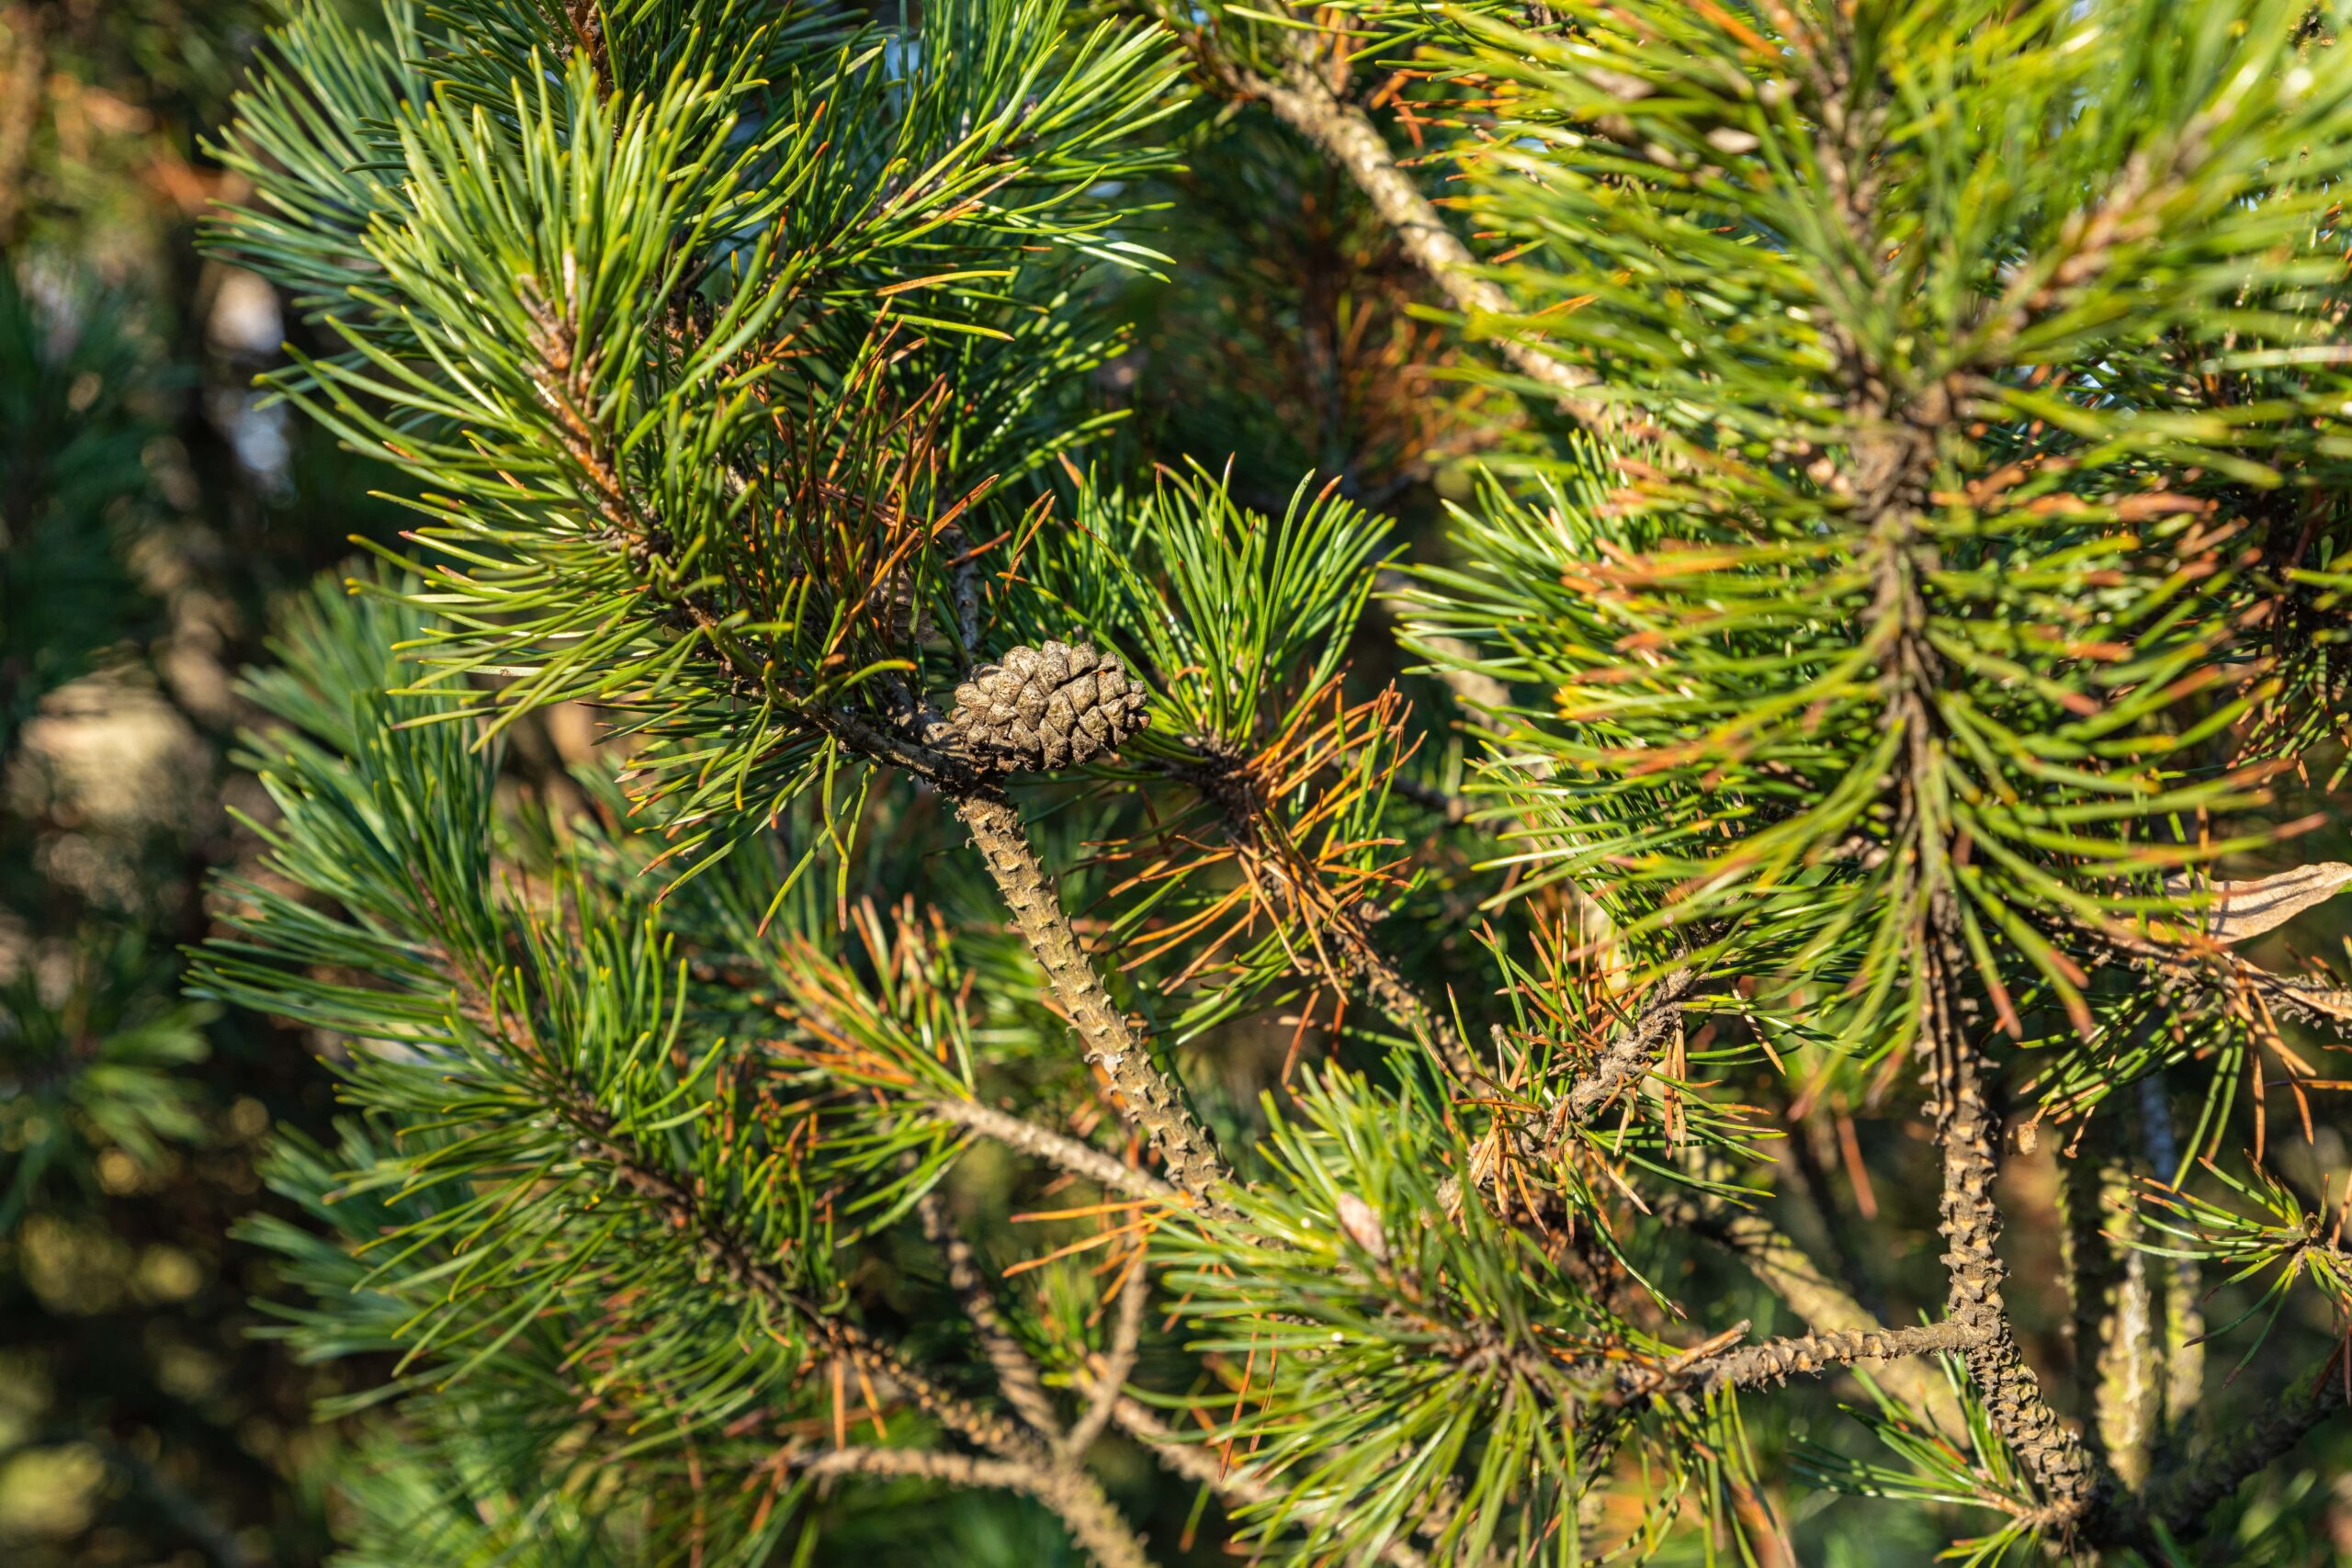 Close-up of a pine tree in Georgia.